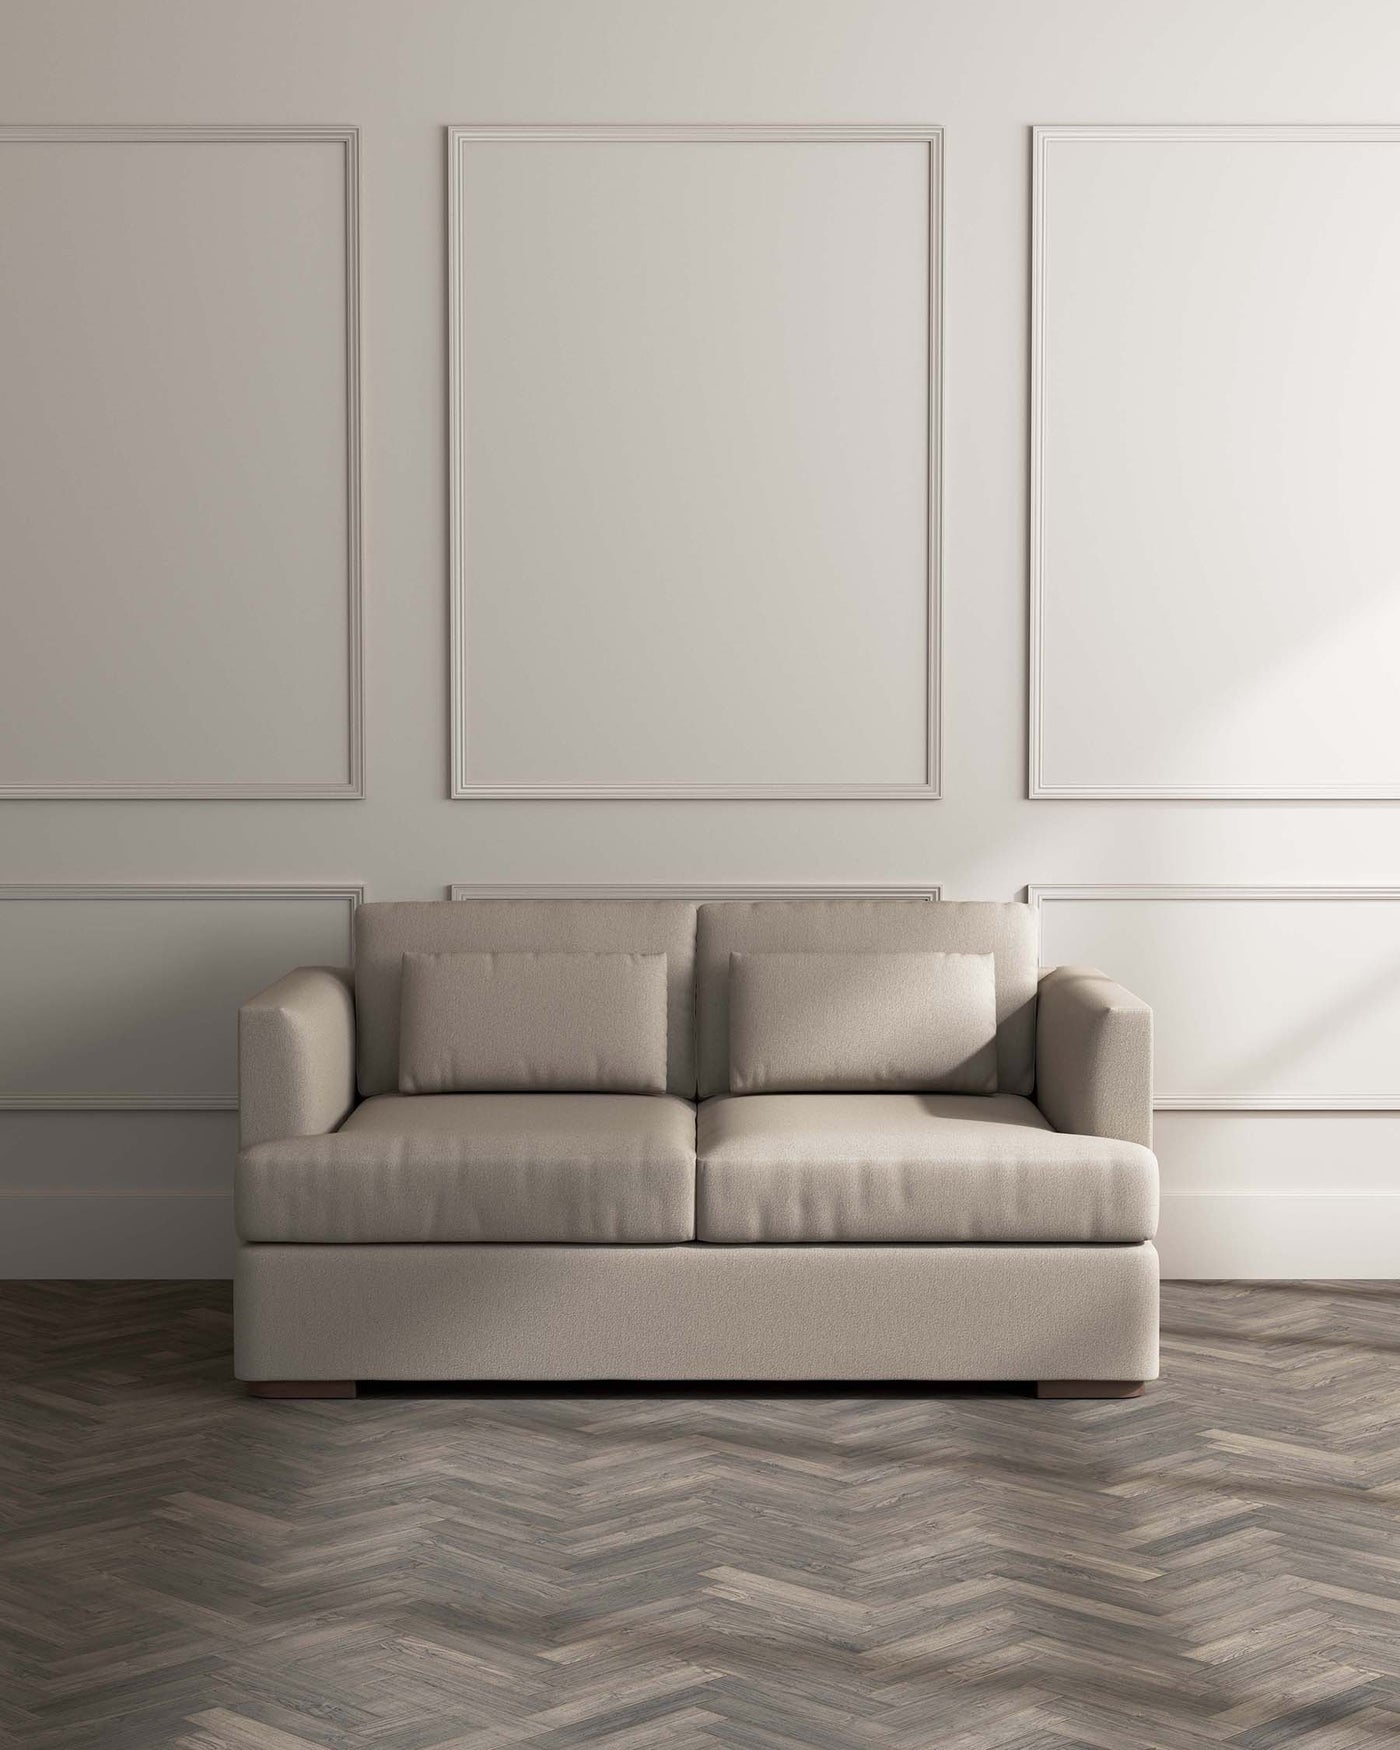 Modern minimalist beige upholstered sofa with clean lines and rectangular cushions on a herringbone parquet floor against a light grey wall with framed artwork.